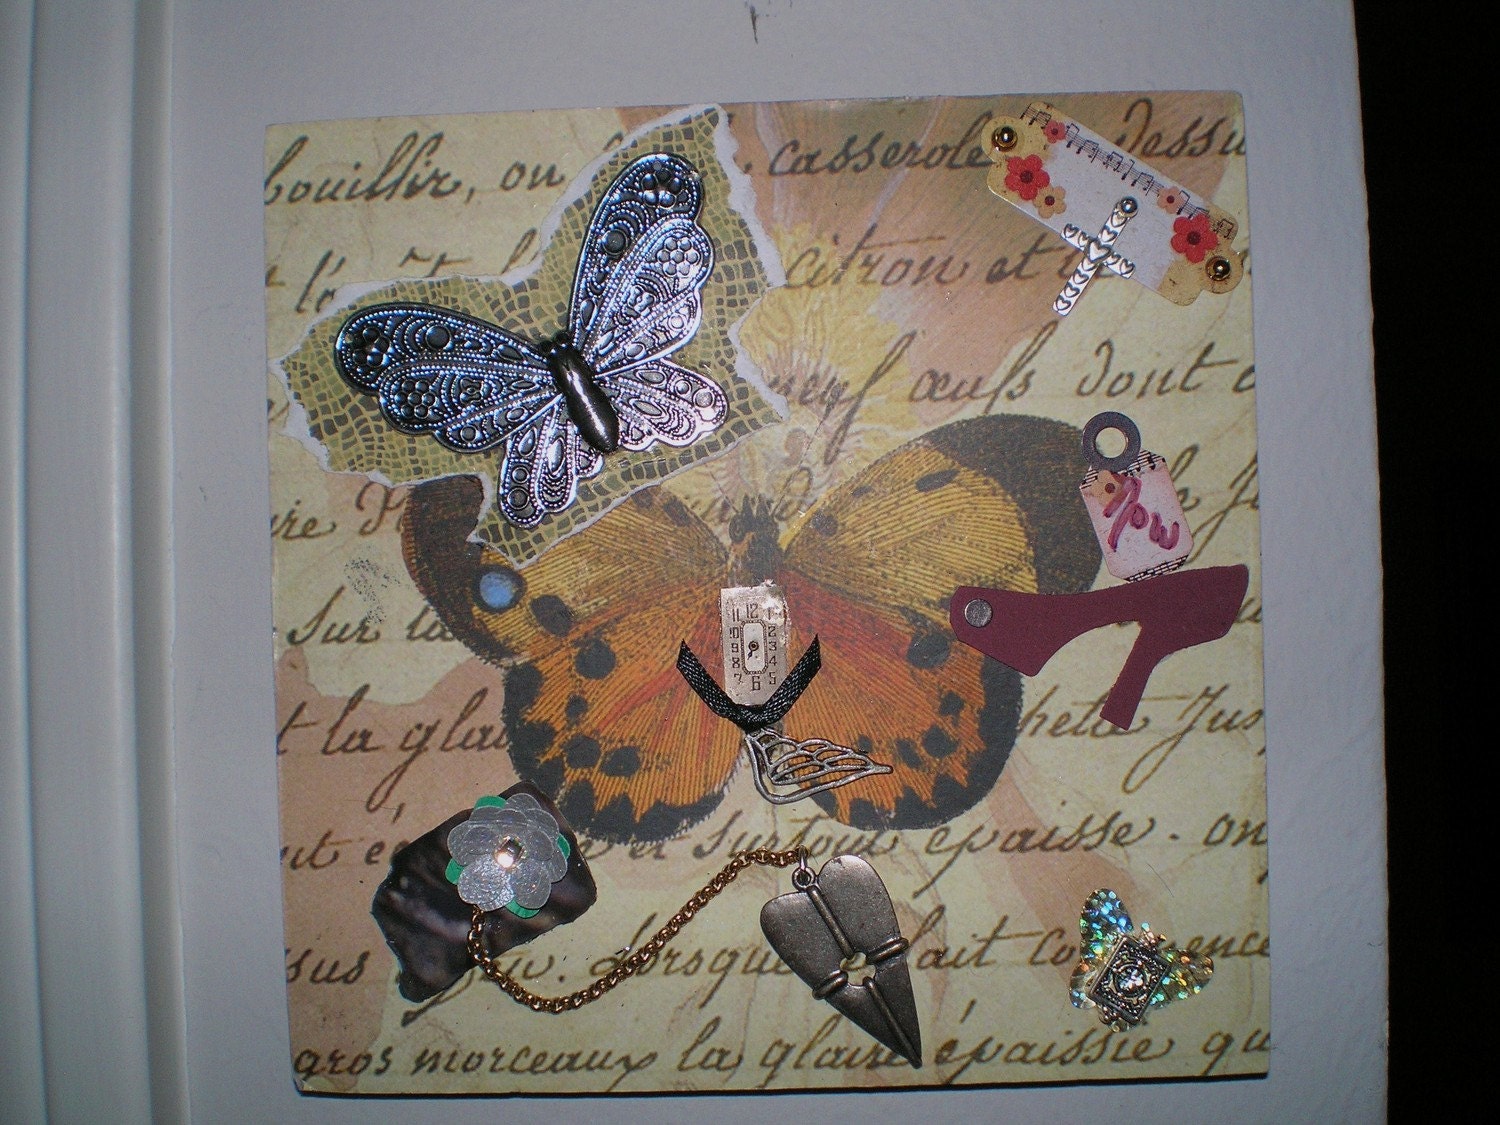 She Dreams of Flight 1 - Part 1 in my 4-part series of OOAK Altered Art Collage Mixed Media Plaques with Jewelry Butterflies Dragonflies and Paper Flowers